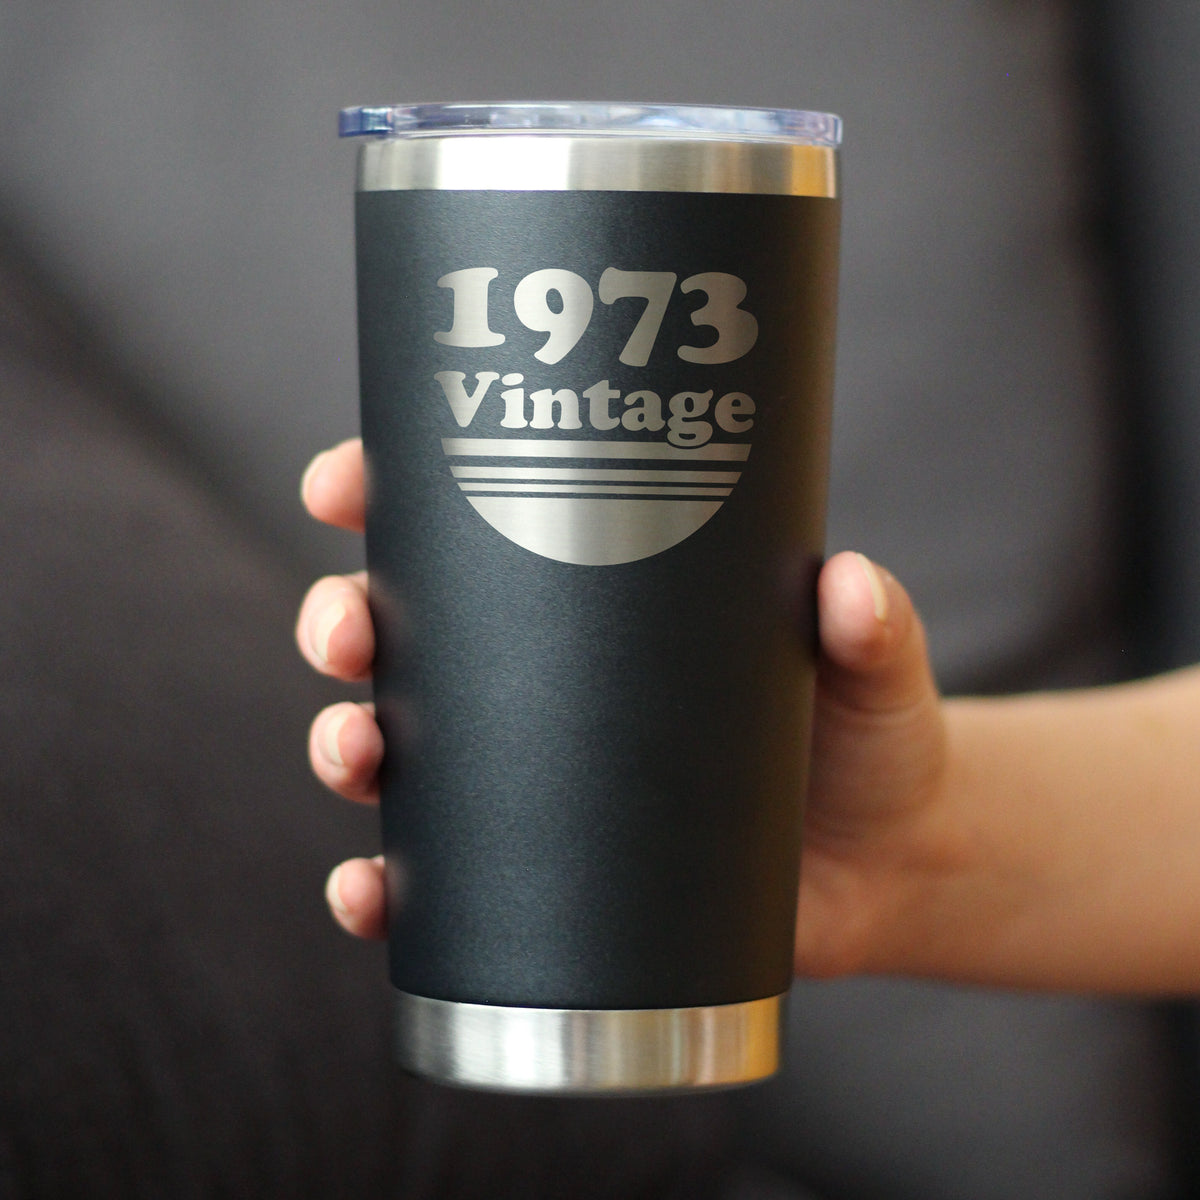 Vintage 1973 - Insulated Coffee Tumbler Cup with Sliding Lid - 20 oz - Funny 51st Birthday Gift for Women or Men Turning 51